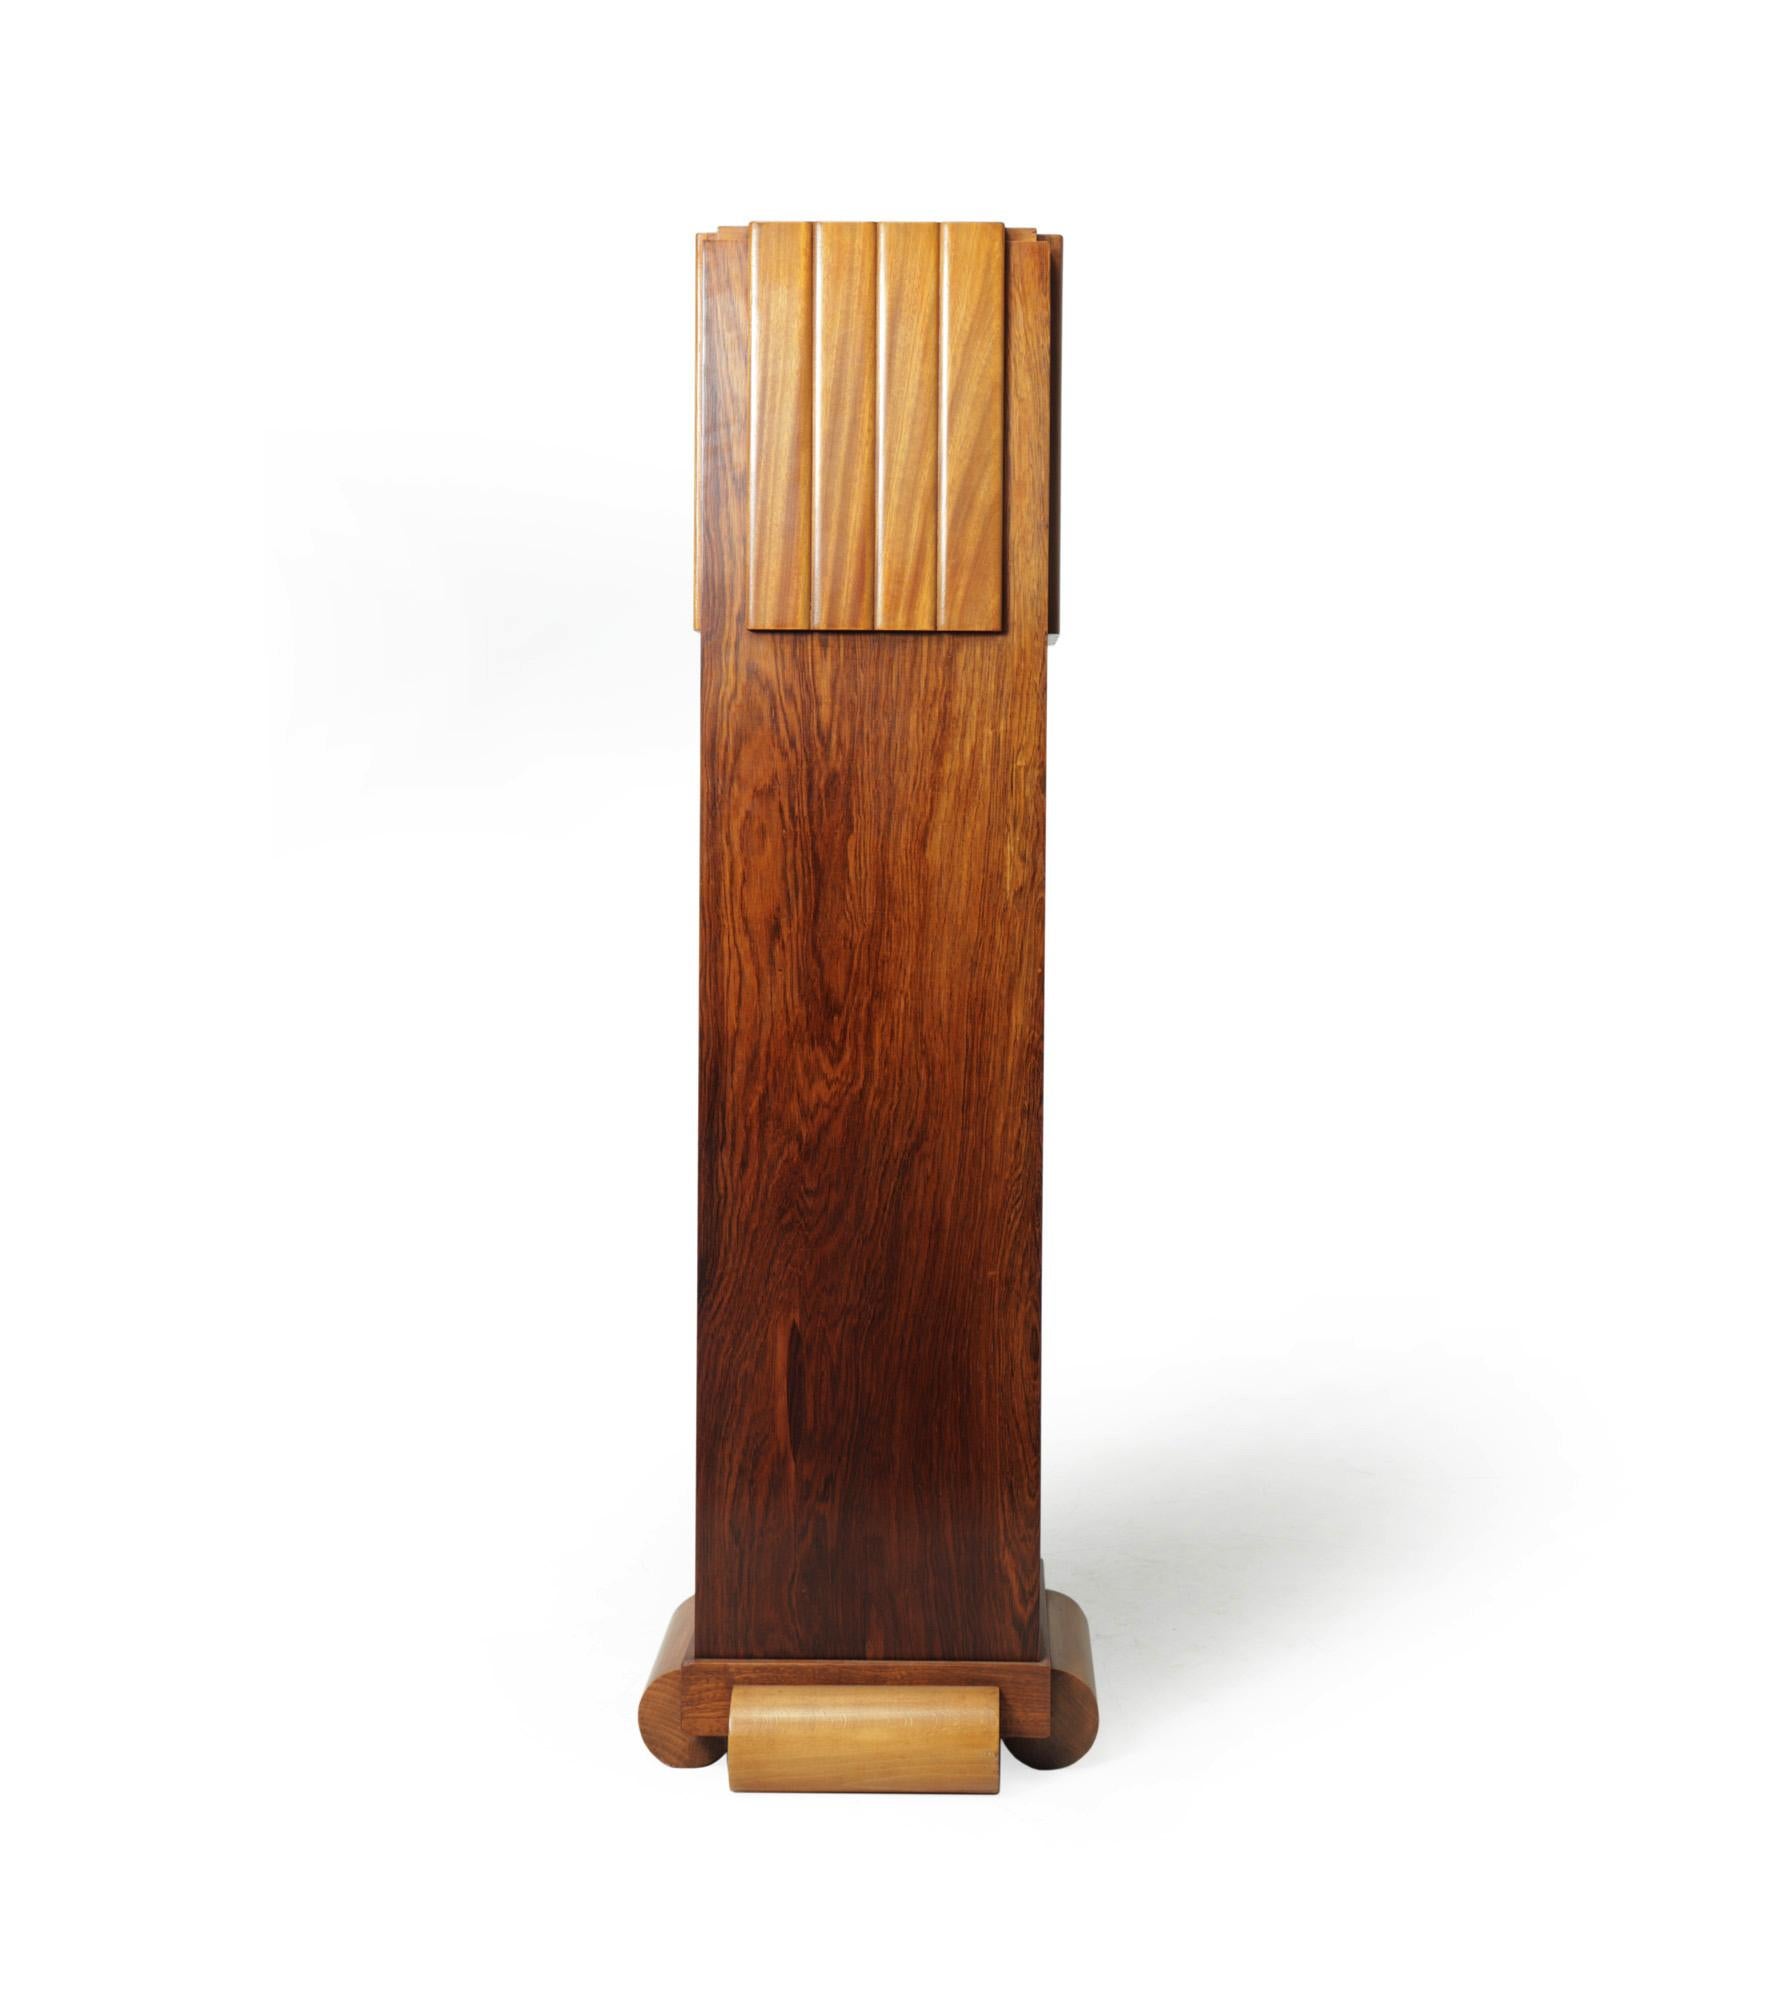 Art Deco walnut column c1925
A walnut, rosewood and satin birch column or pedestal stand, ideal for bronze or Jardinaire the column has been fully restored and polished

Age: 1925

Style: Art Deco

Material: Walnut

Origin :